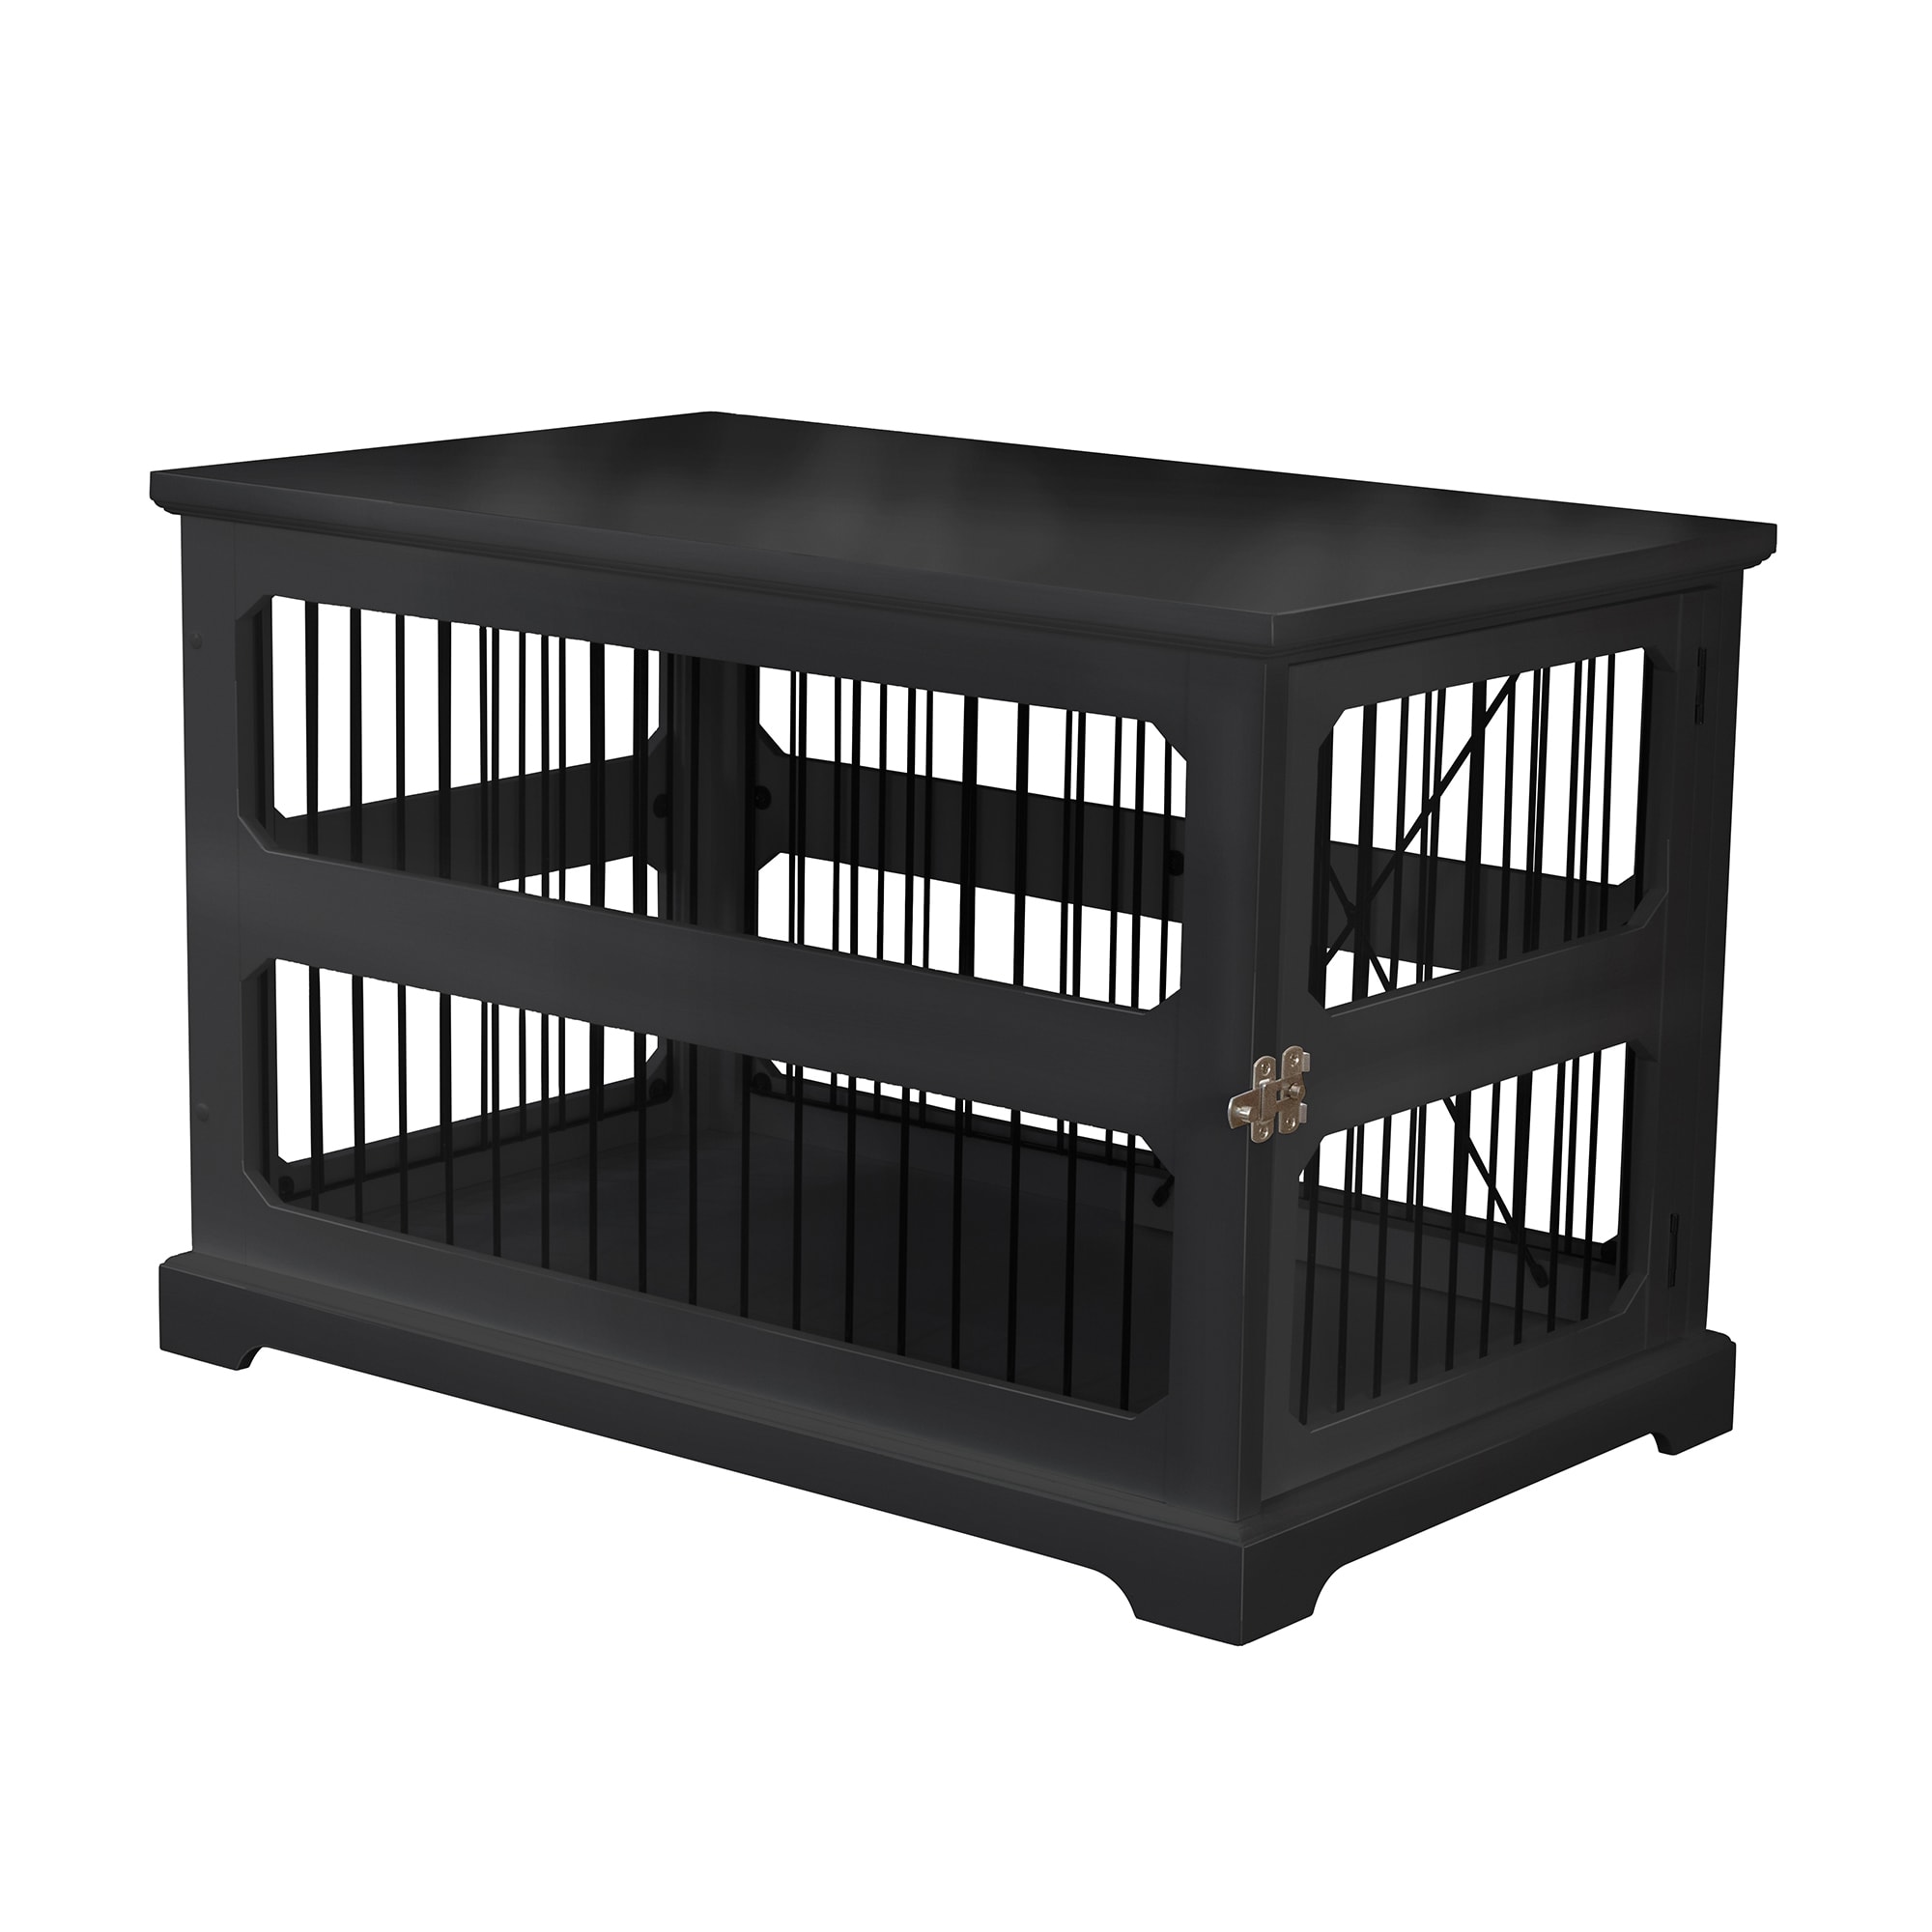 Photos - Dog Kennel Zoovilla Zoovilla Slide Aside Crate And End Table In Black, 35.43"L X 21.6